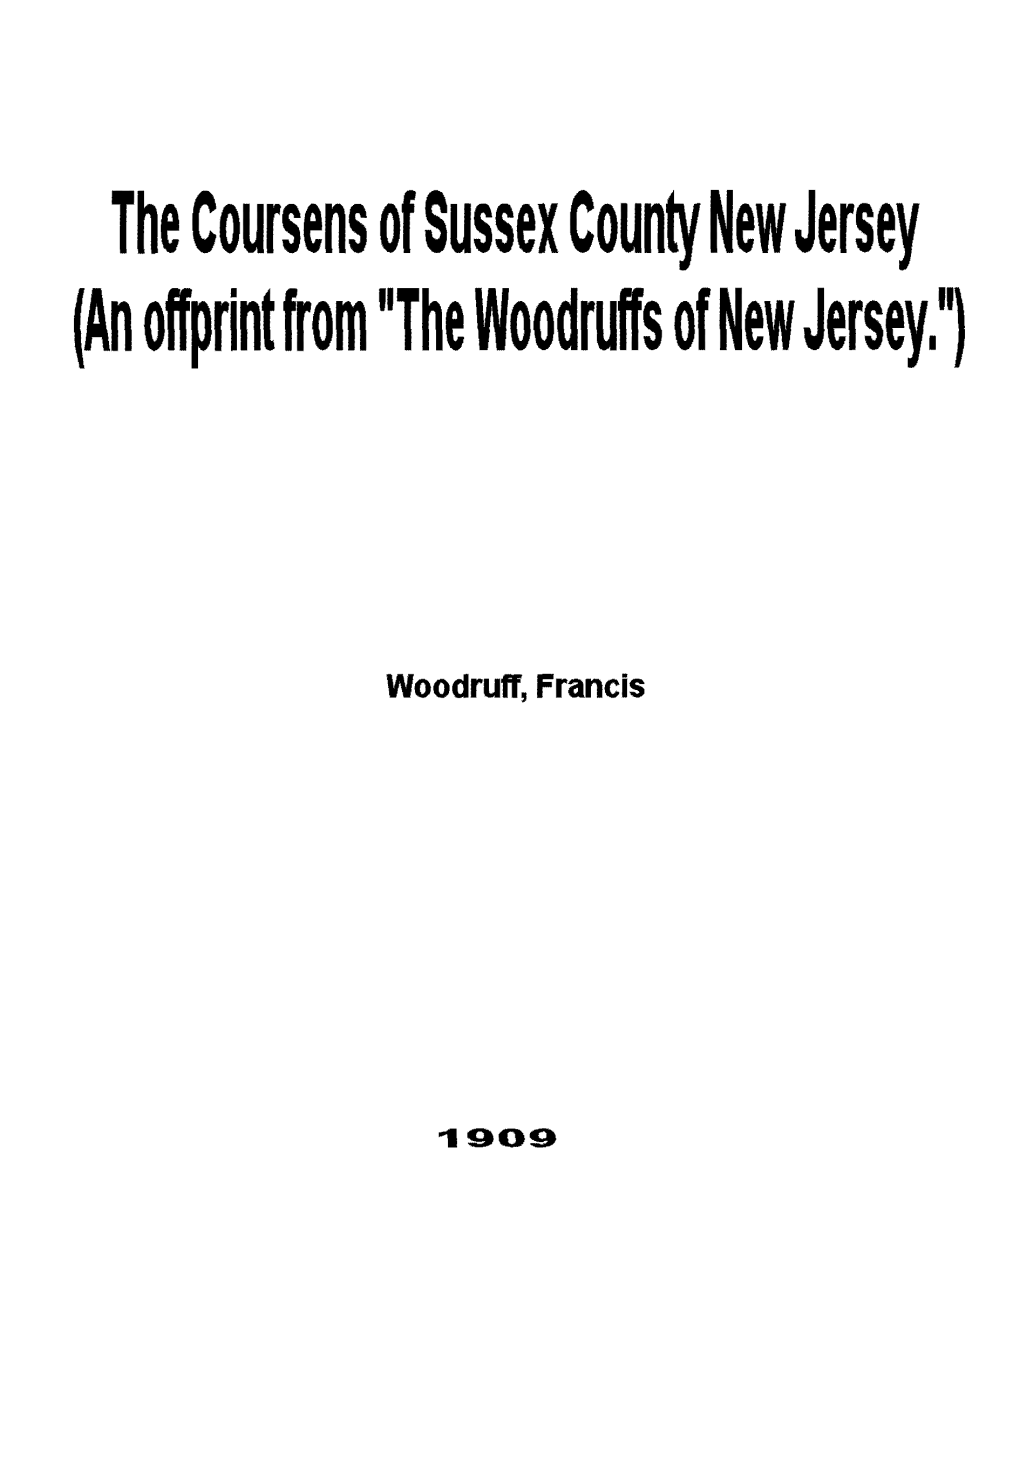 The Coursens of Sussex Counfy New Jersey (An Offprint ~Om "The Woodruffs of New Jersey,'1